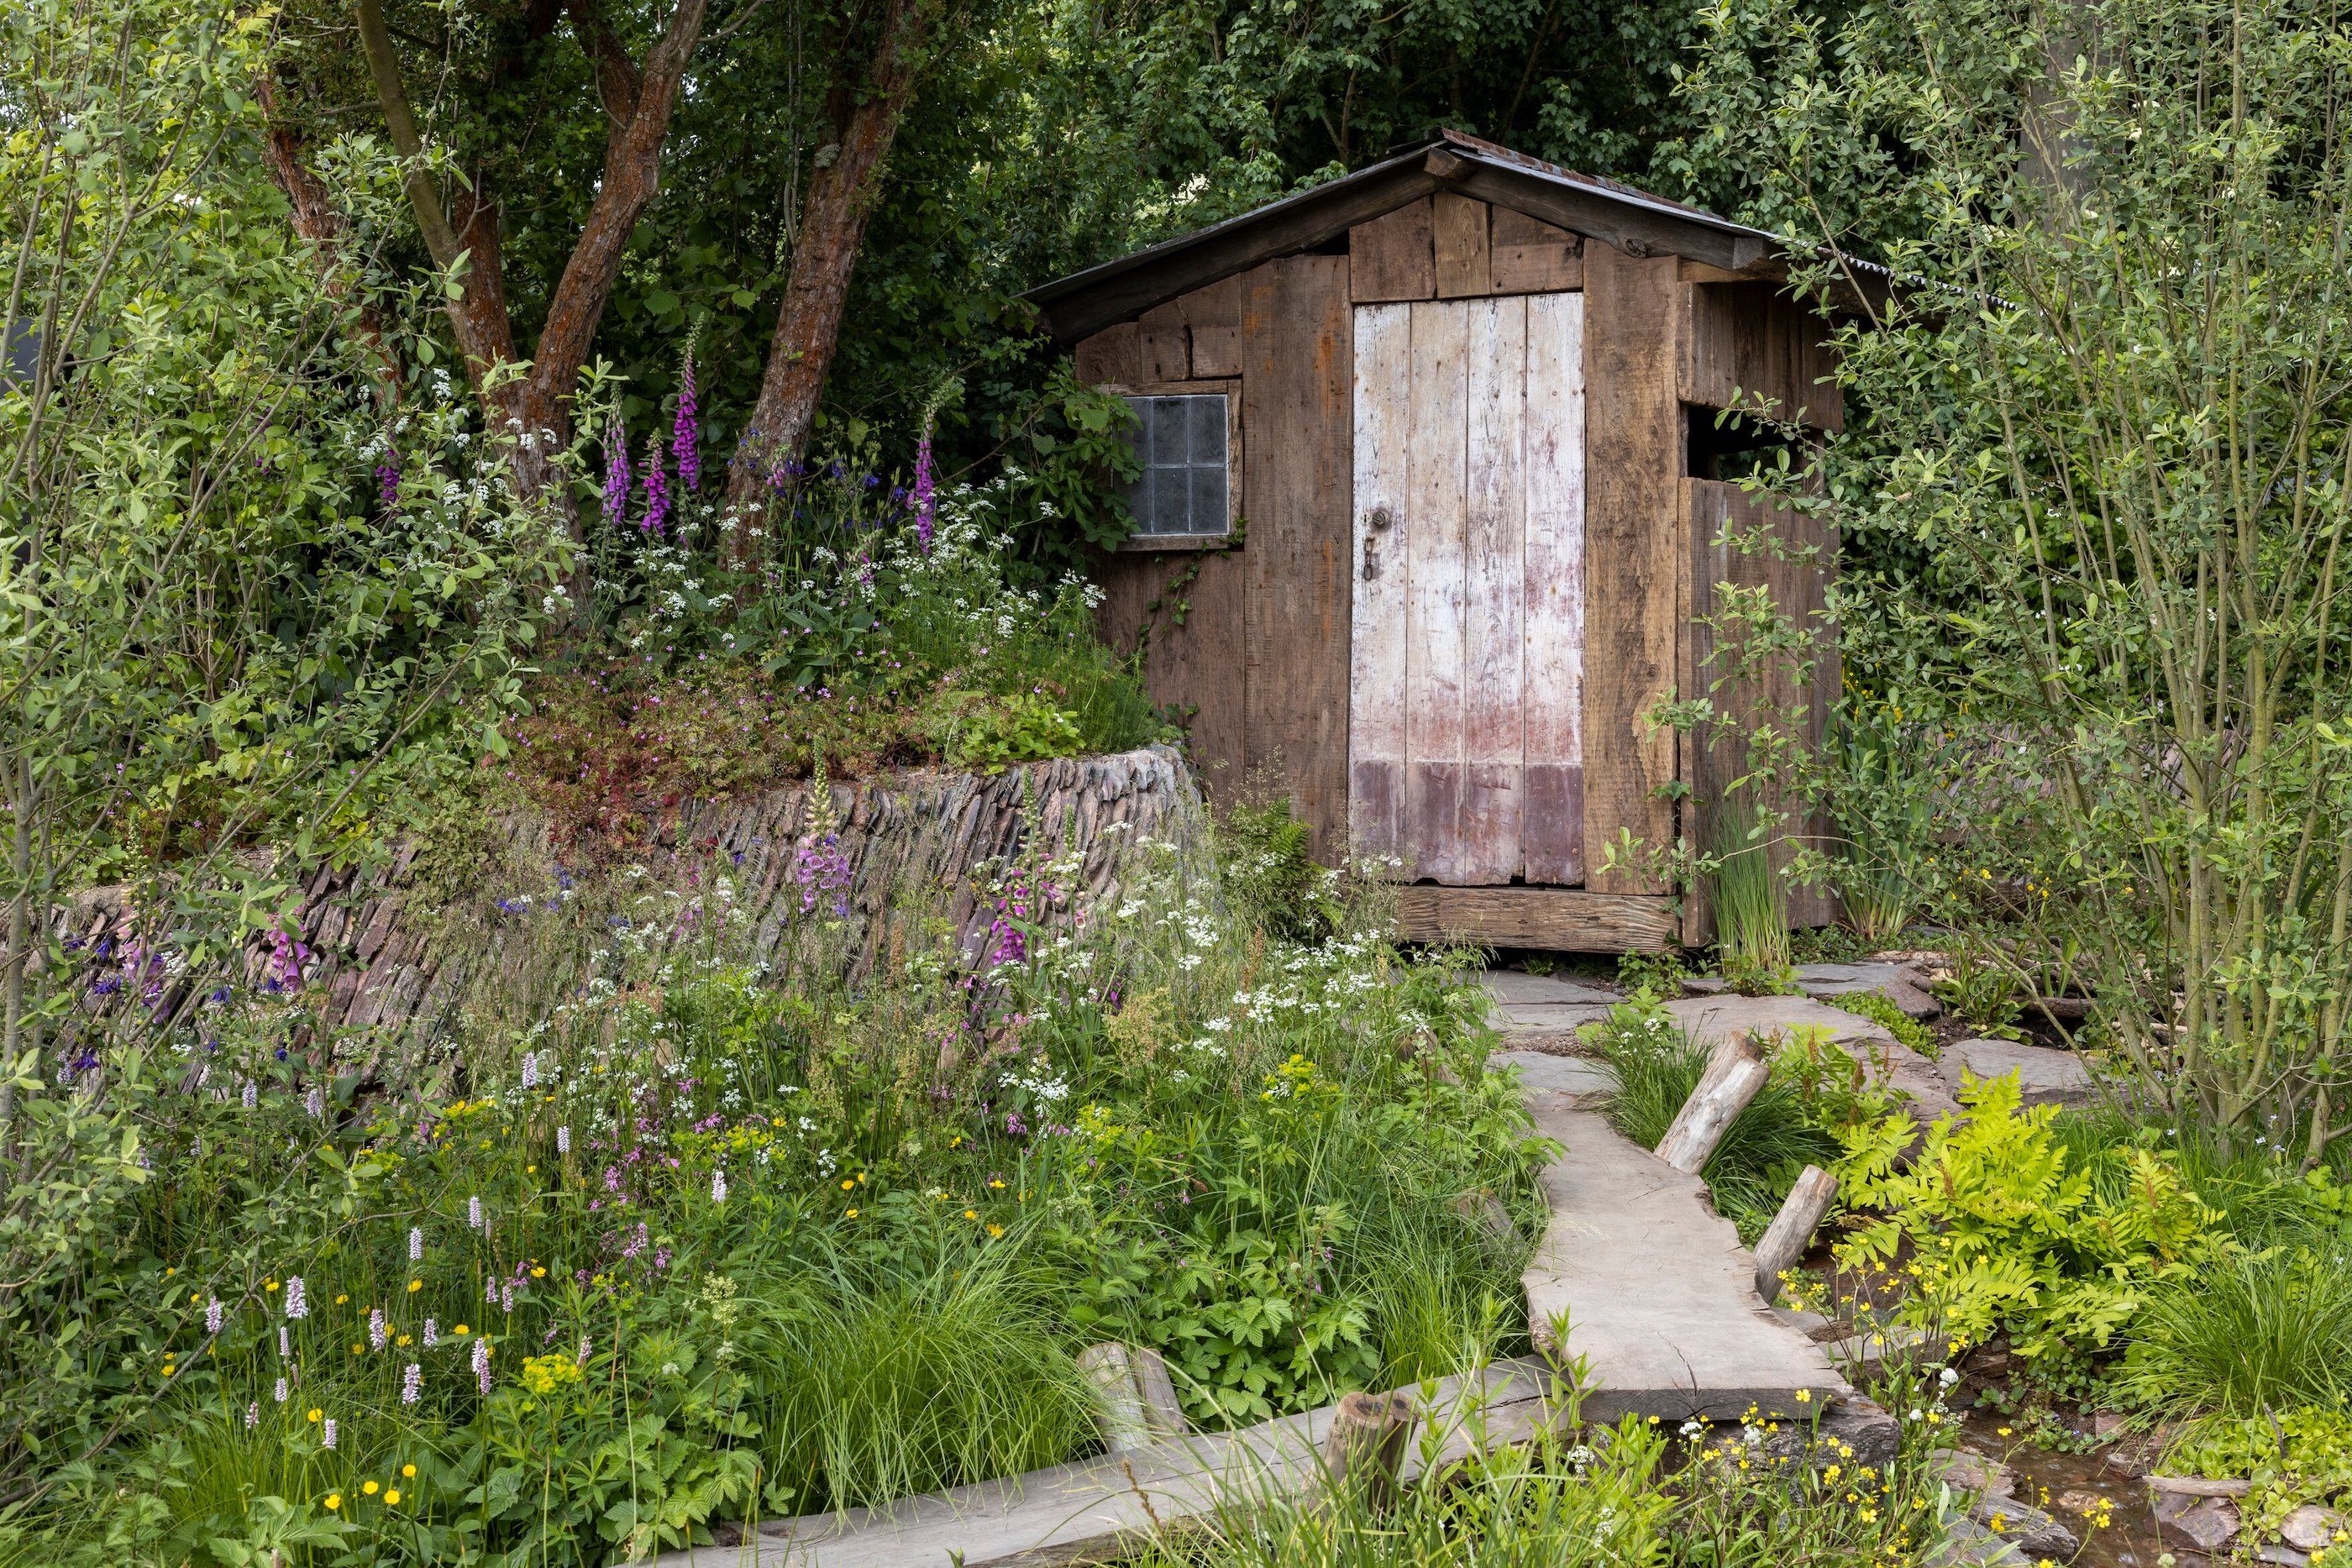 Chelsea Flower Show: Monty Don says 'two things bother him' about the Rewilding Britain Landscape garden